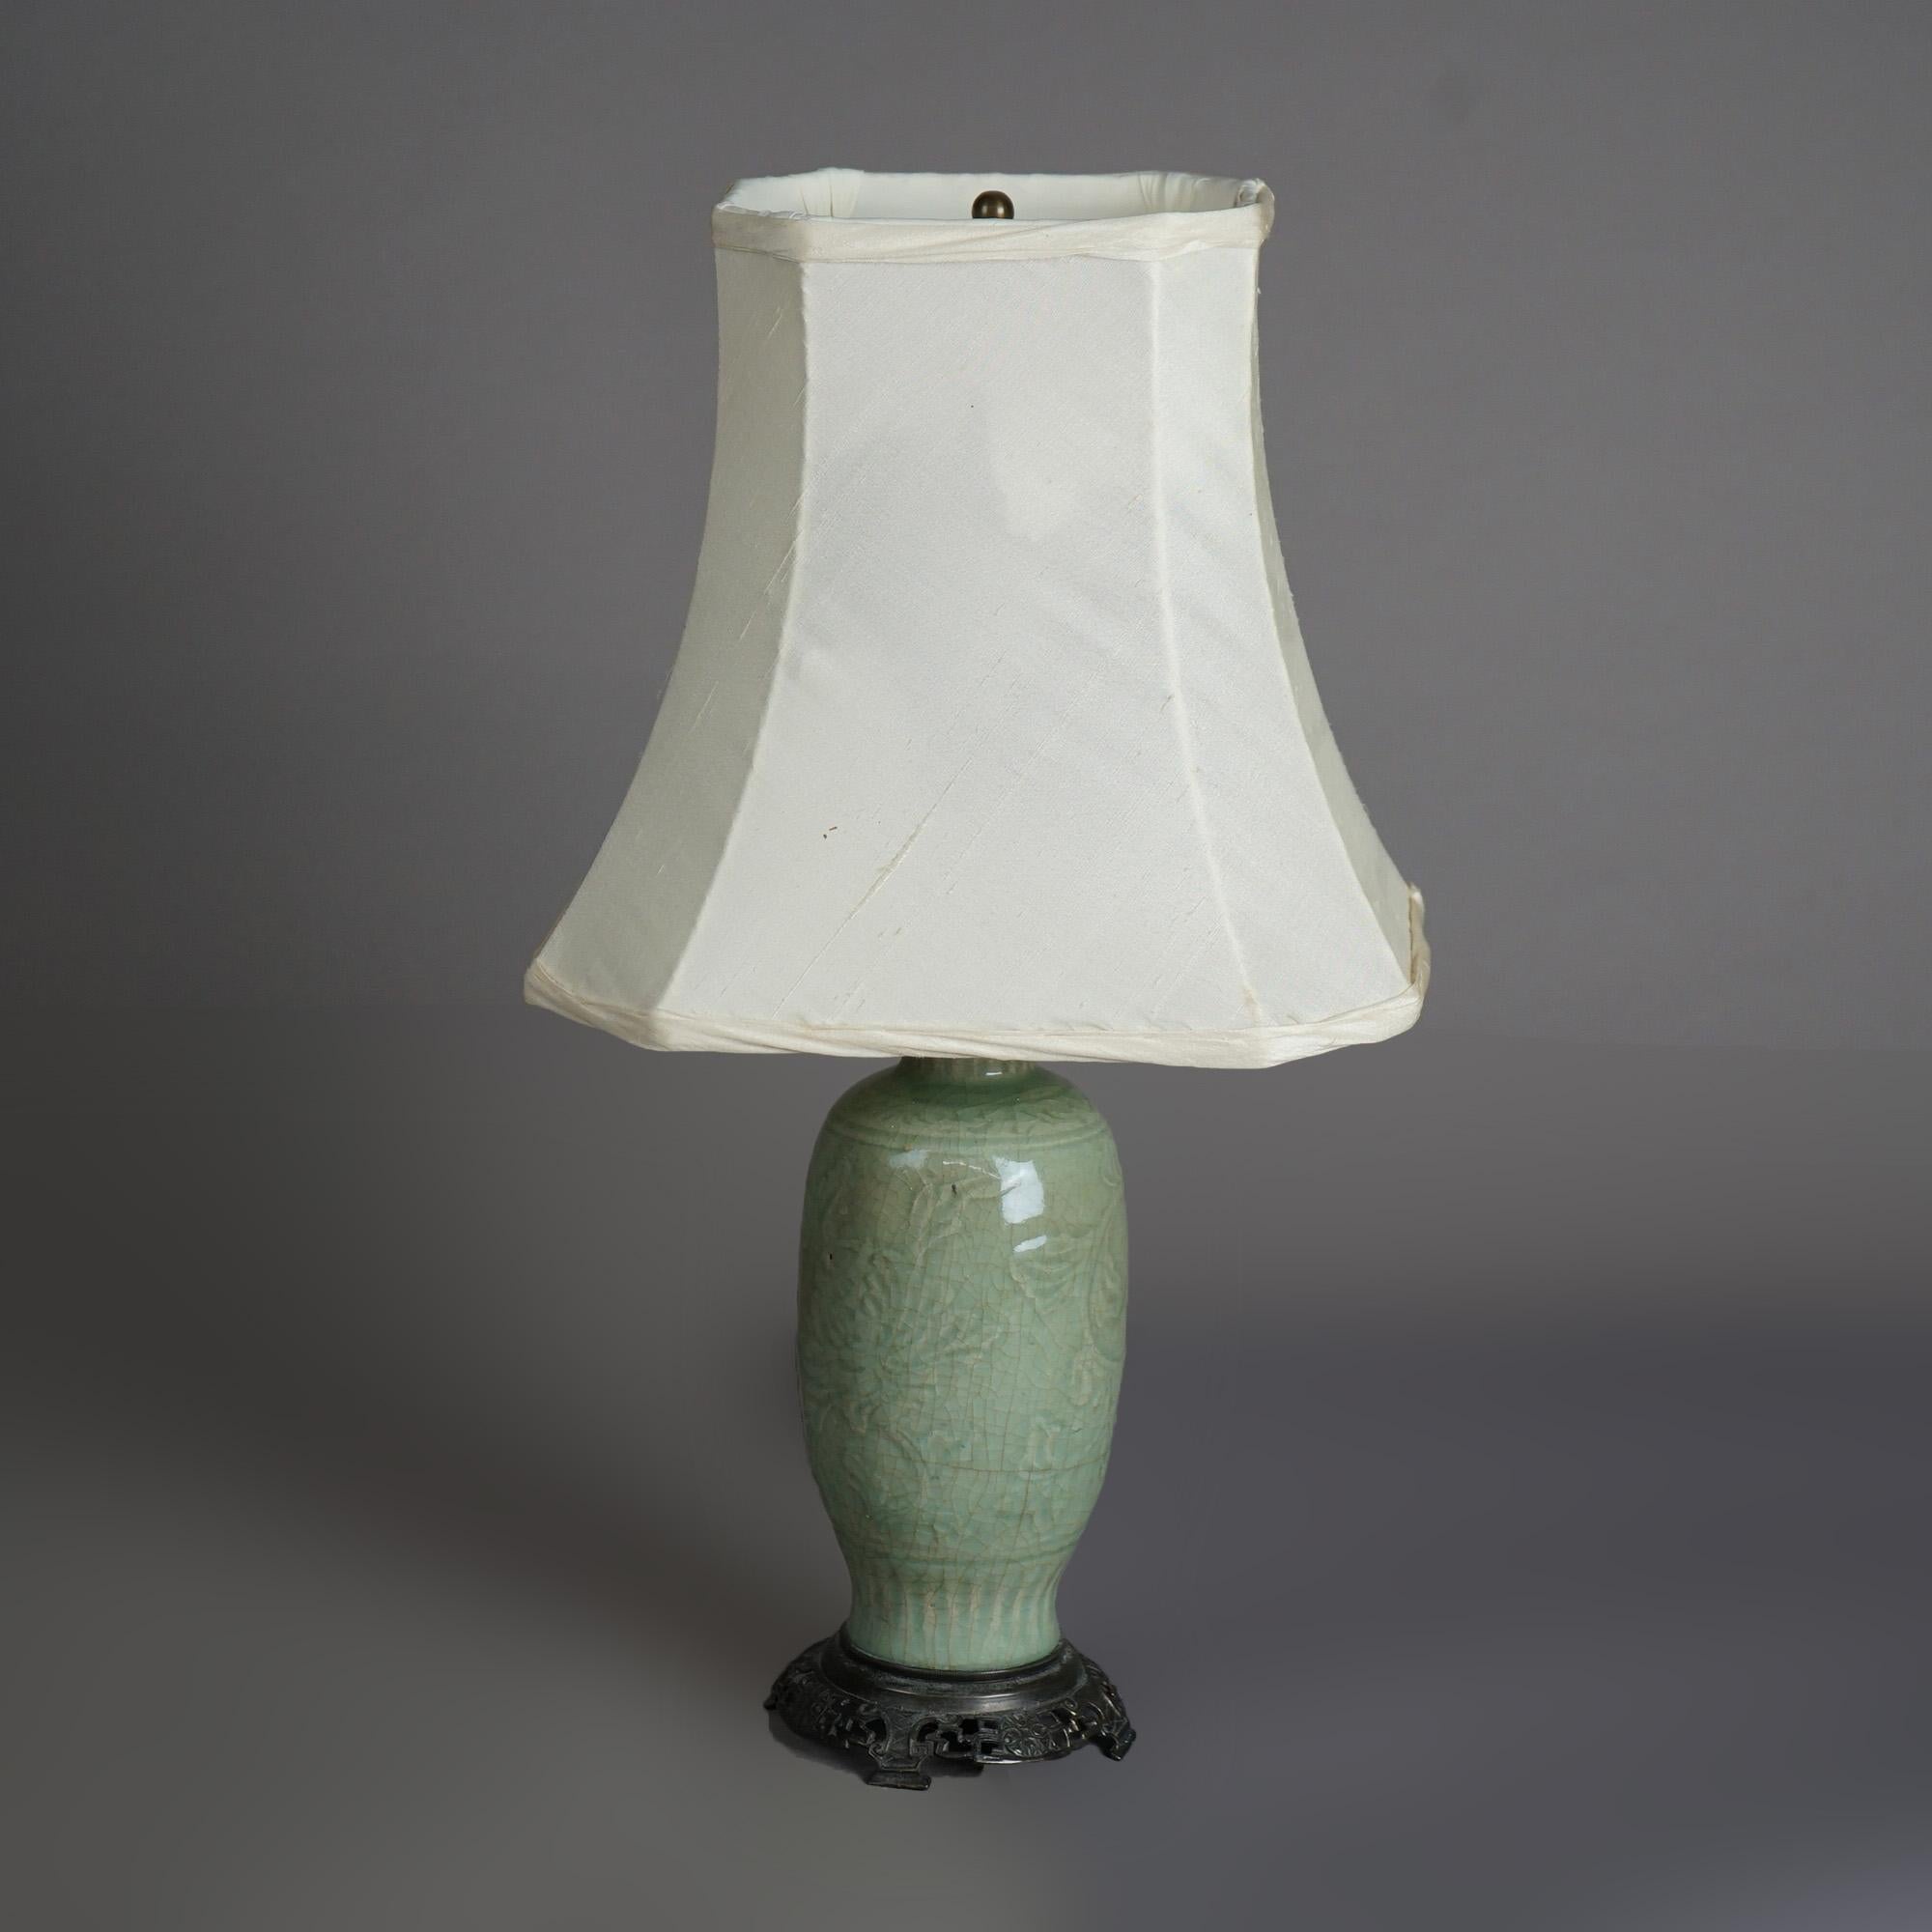 An antique table lamp offers Chinese art pottery vase with embossed foliate decoration and crazed celedon glazing, c1930

Measures - 18